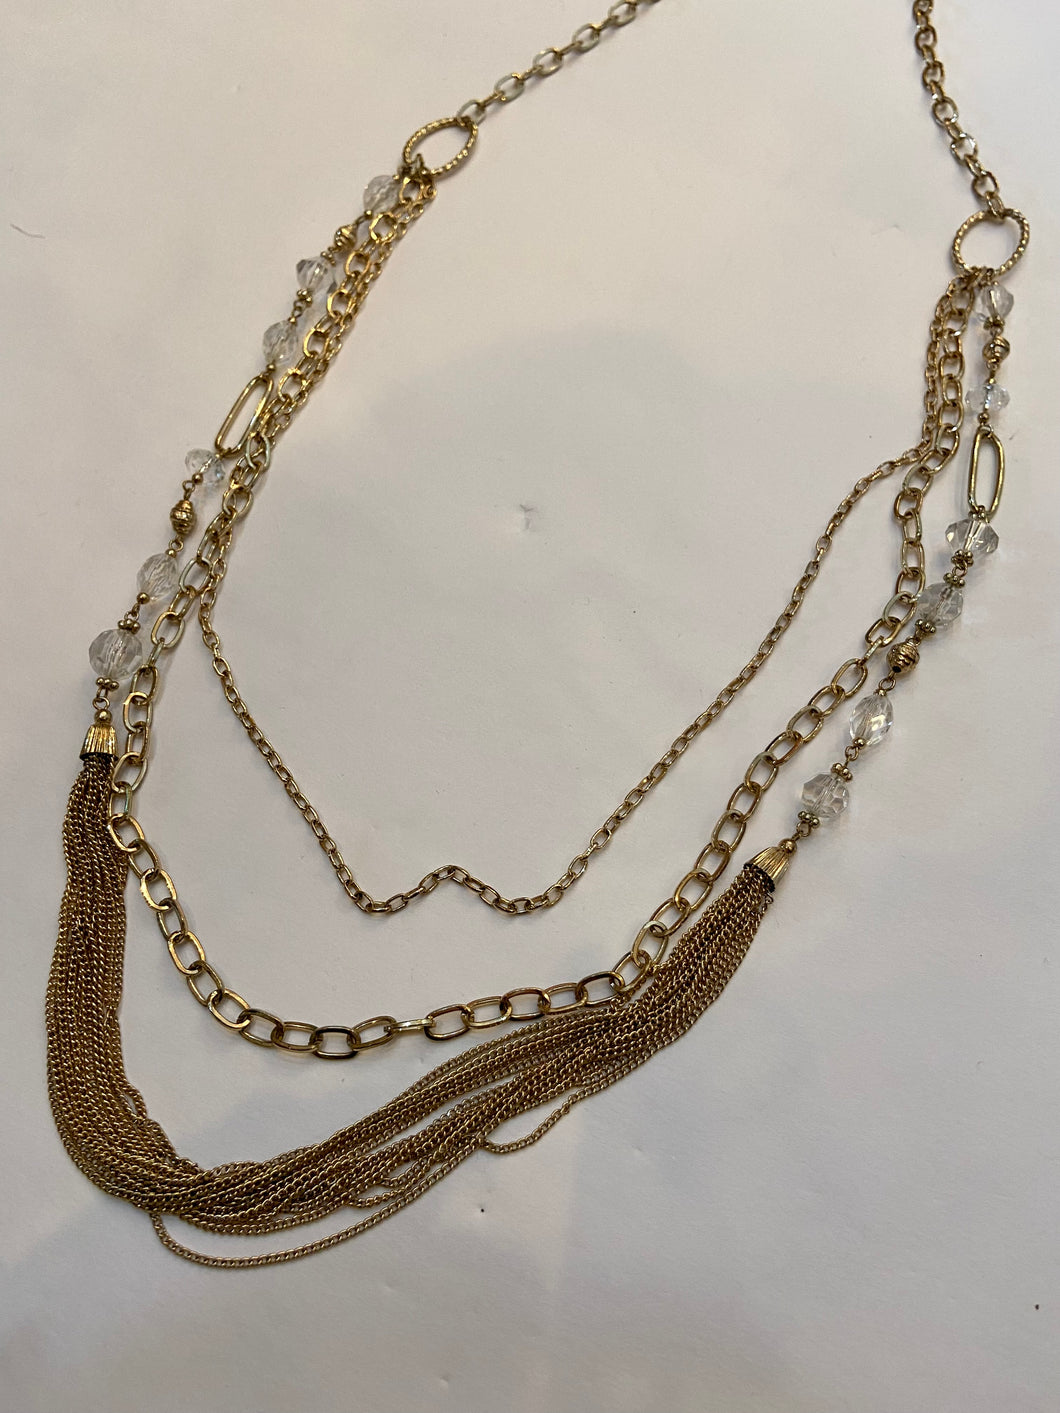 Multi-strand gold link necklace with clear crystal beads